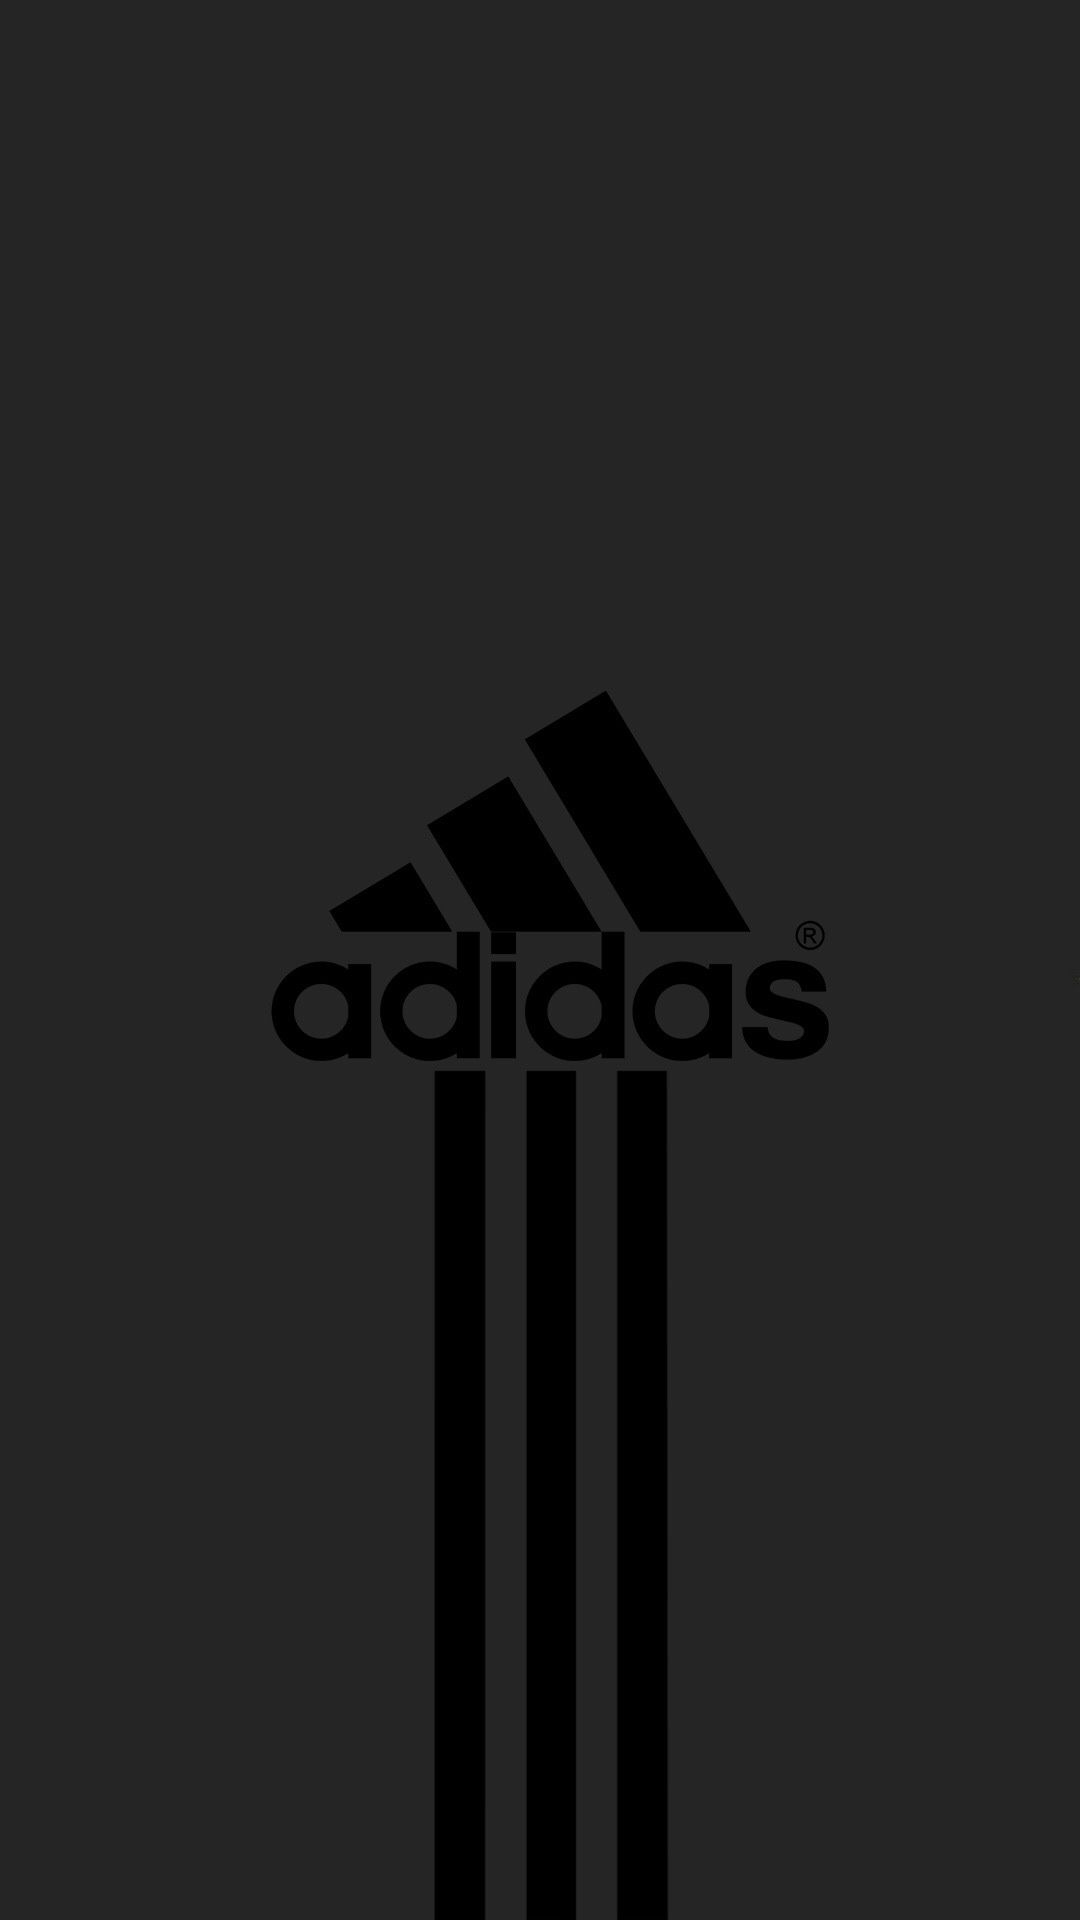 Iphone Adidas Wallpaper Black And White